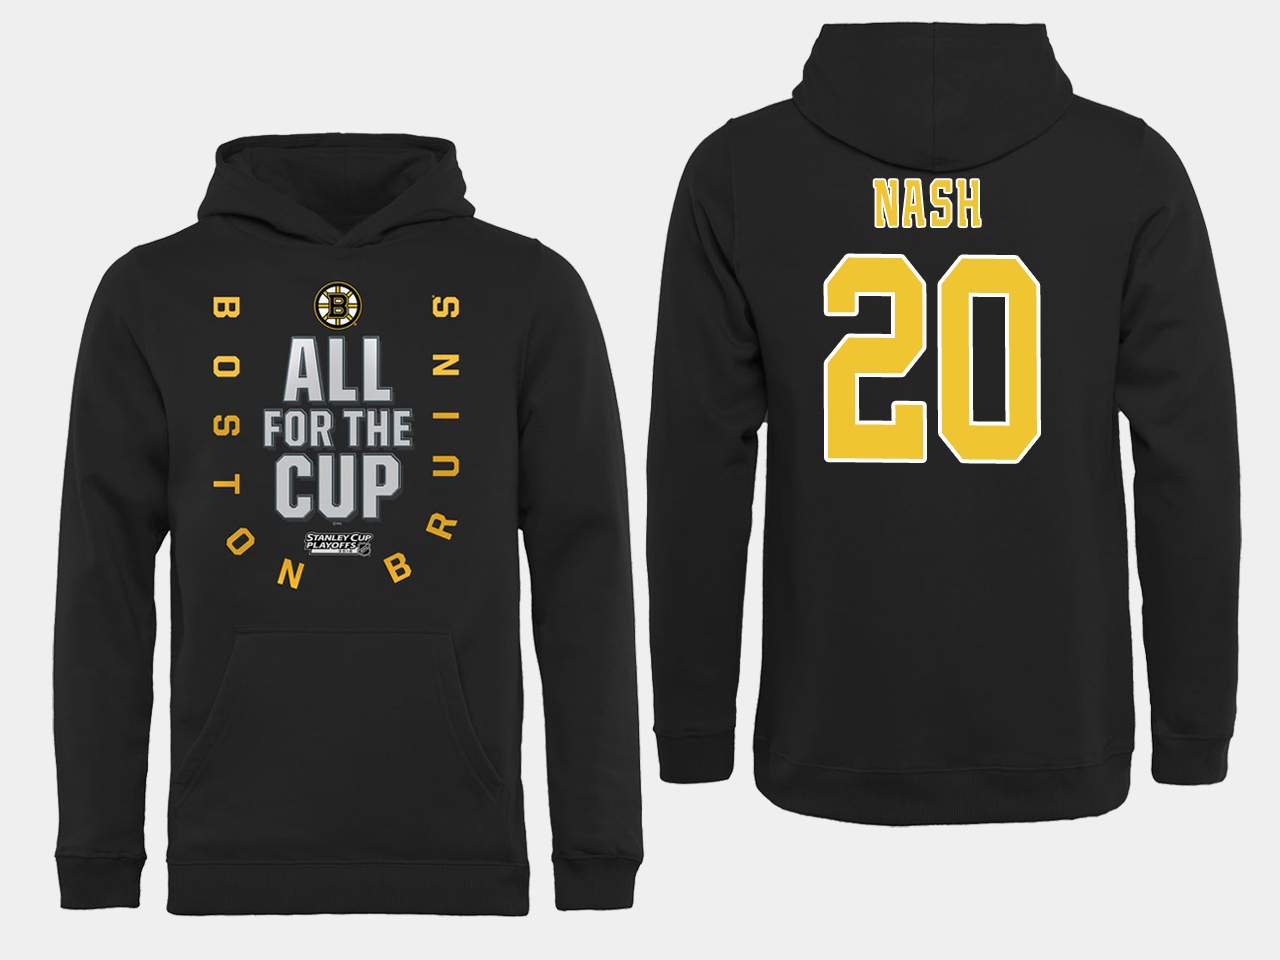 NHL Men Boston Bruins #20 Nash Black All for the Cup Hoodie